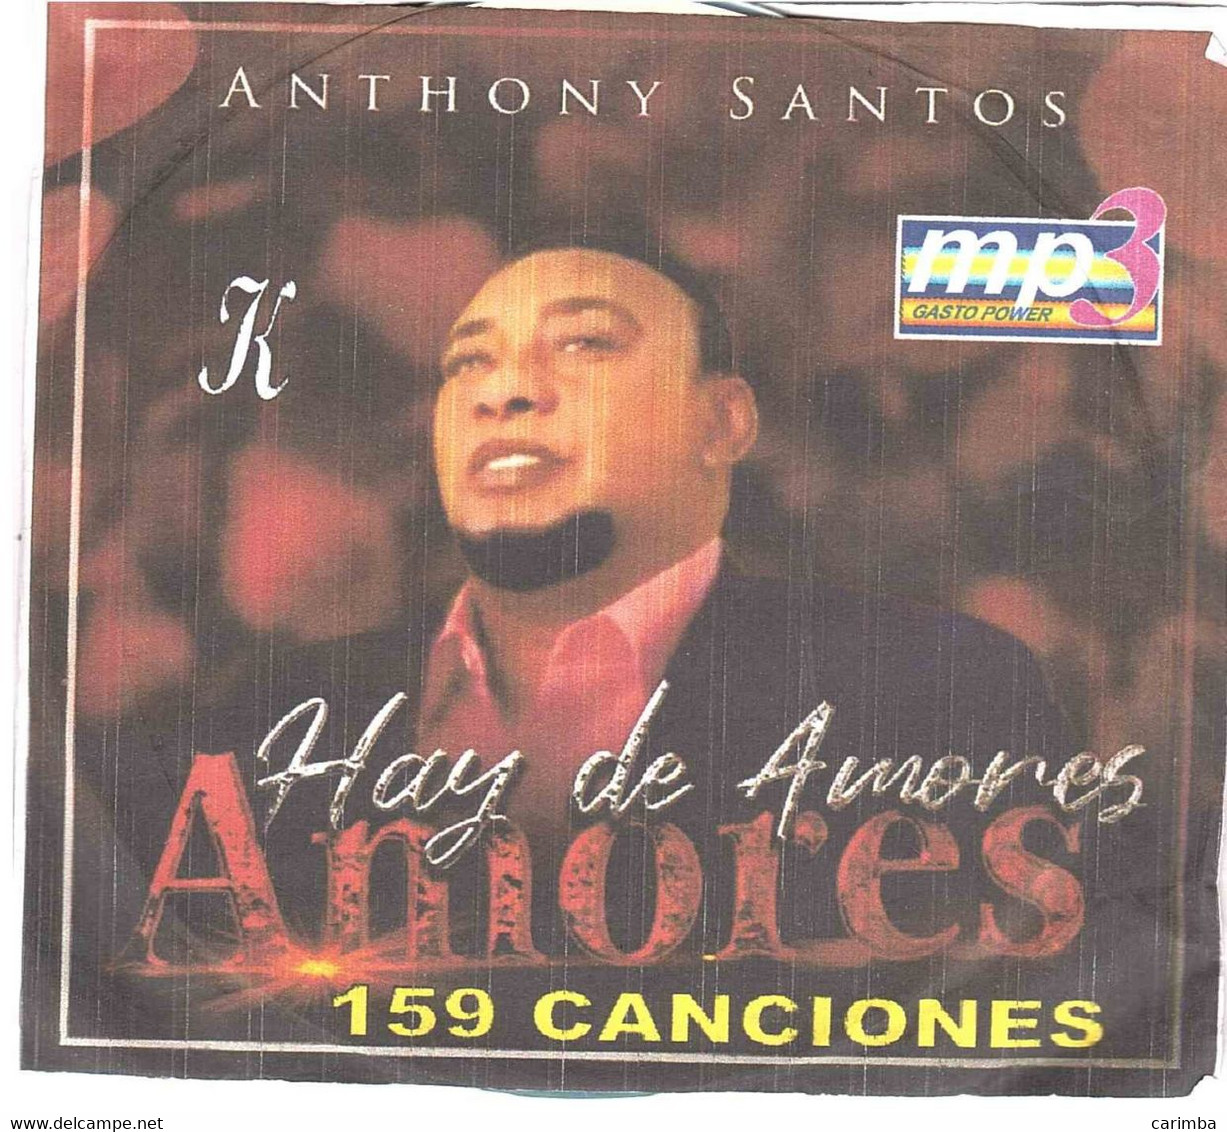 2022 ANTHONY SANTOS AMORES MP3 - Other - Spanish Music